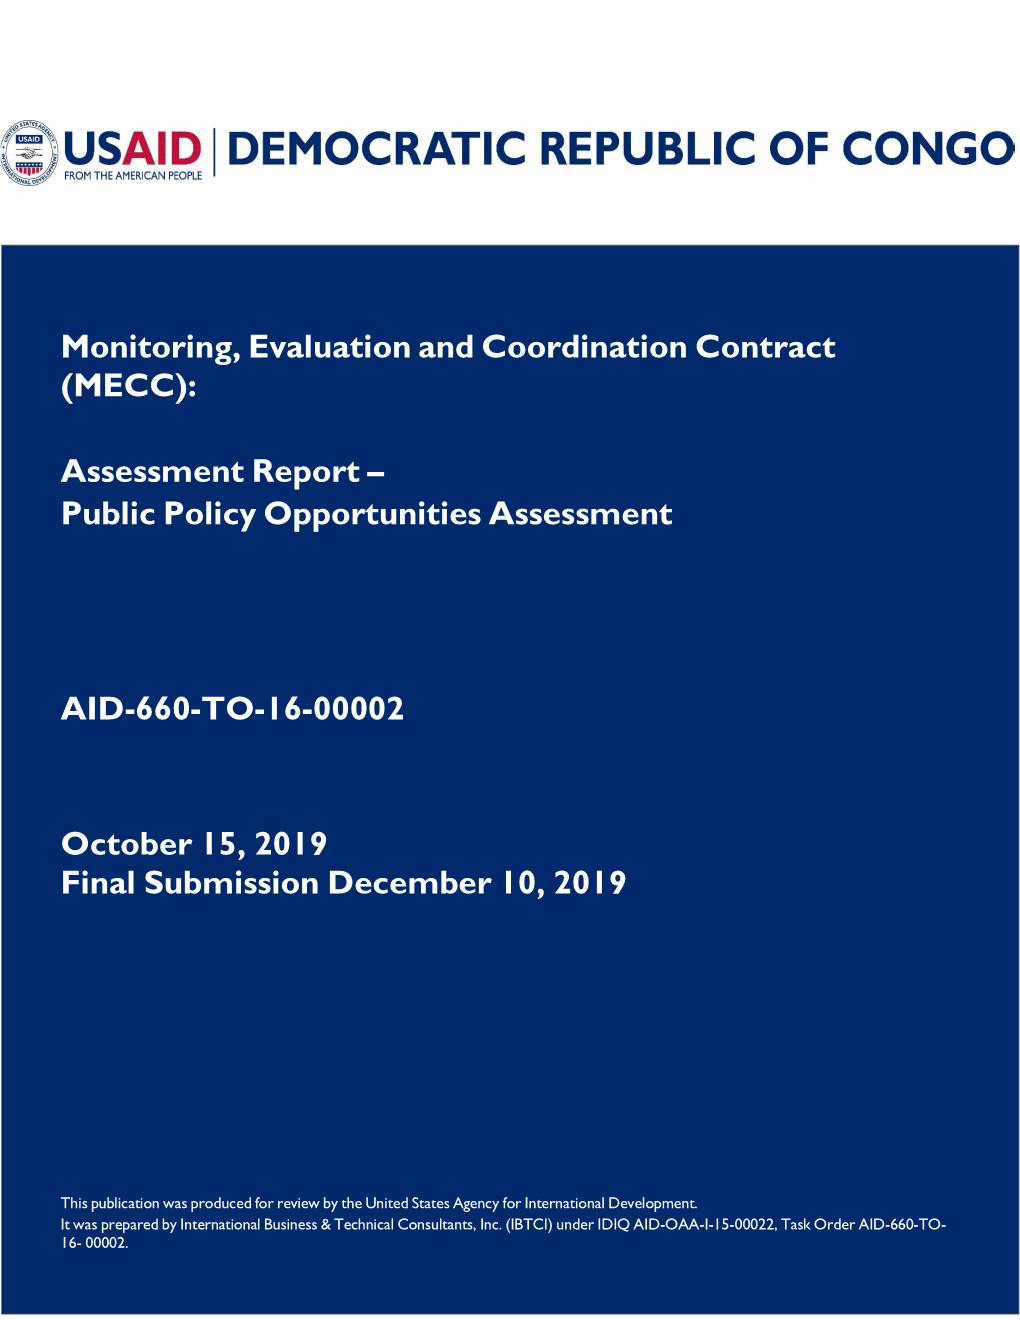 Monitoring, Evaluation and Coordination Contract (MECC)